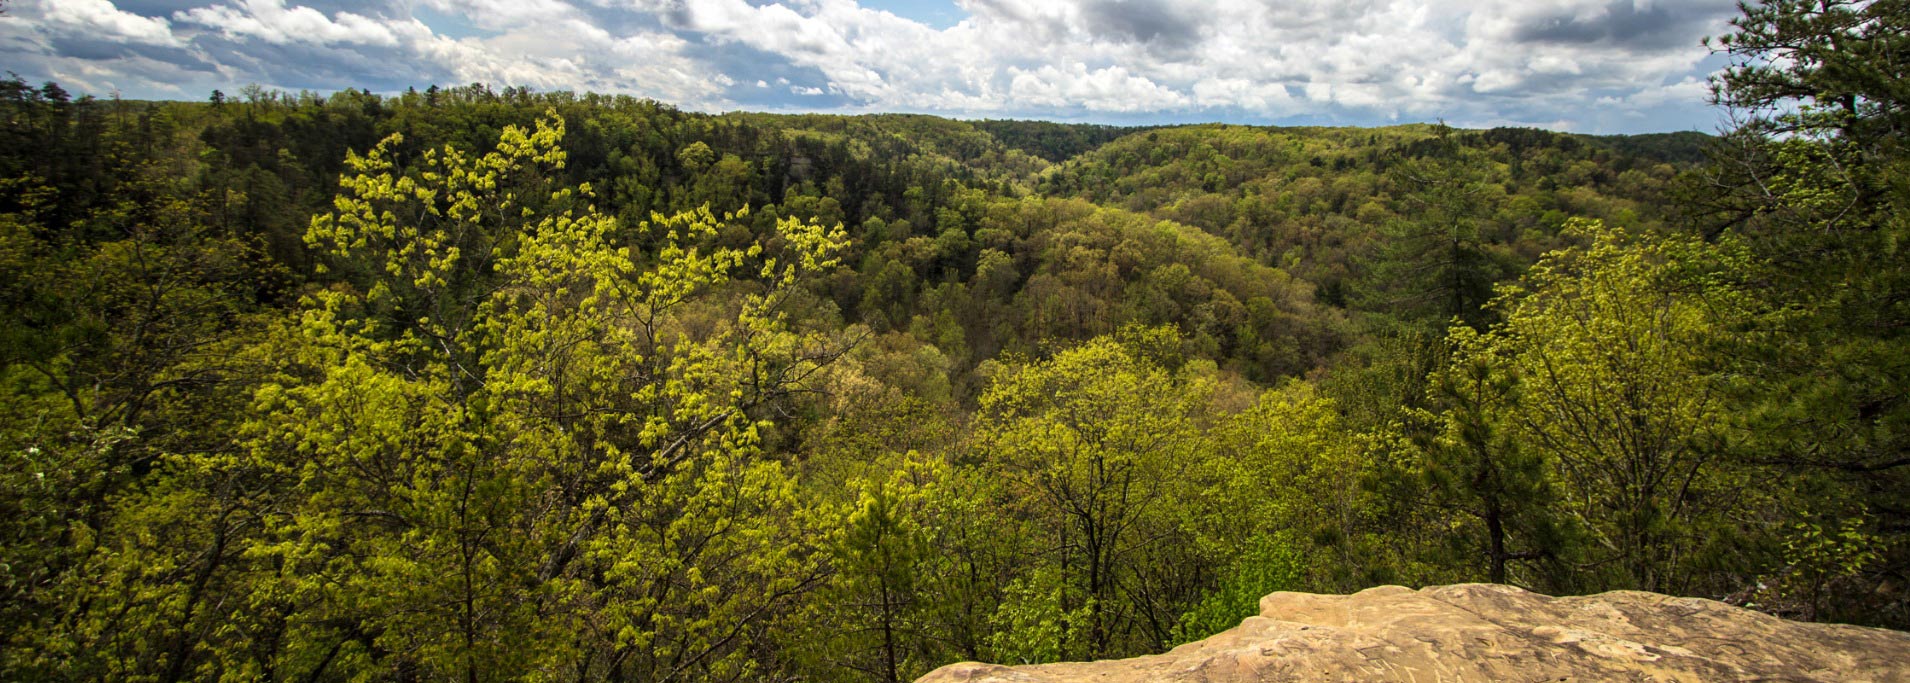 panoramic-view-from-the-natural-bridge-in-kentucky-picture-id524911810